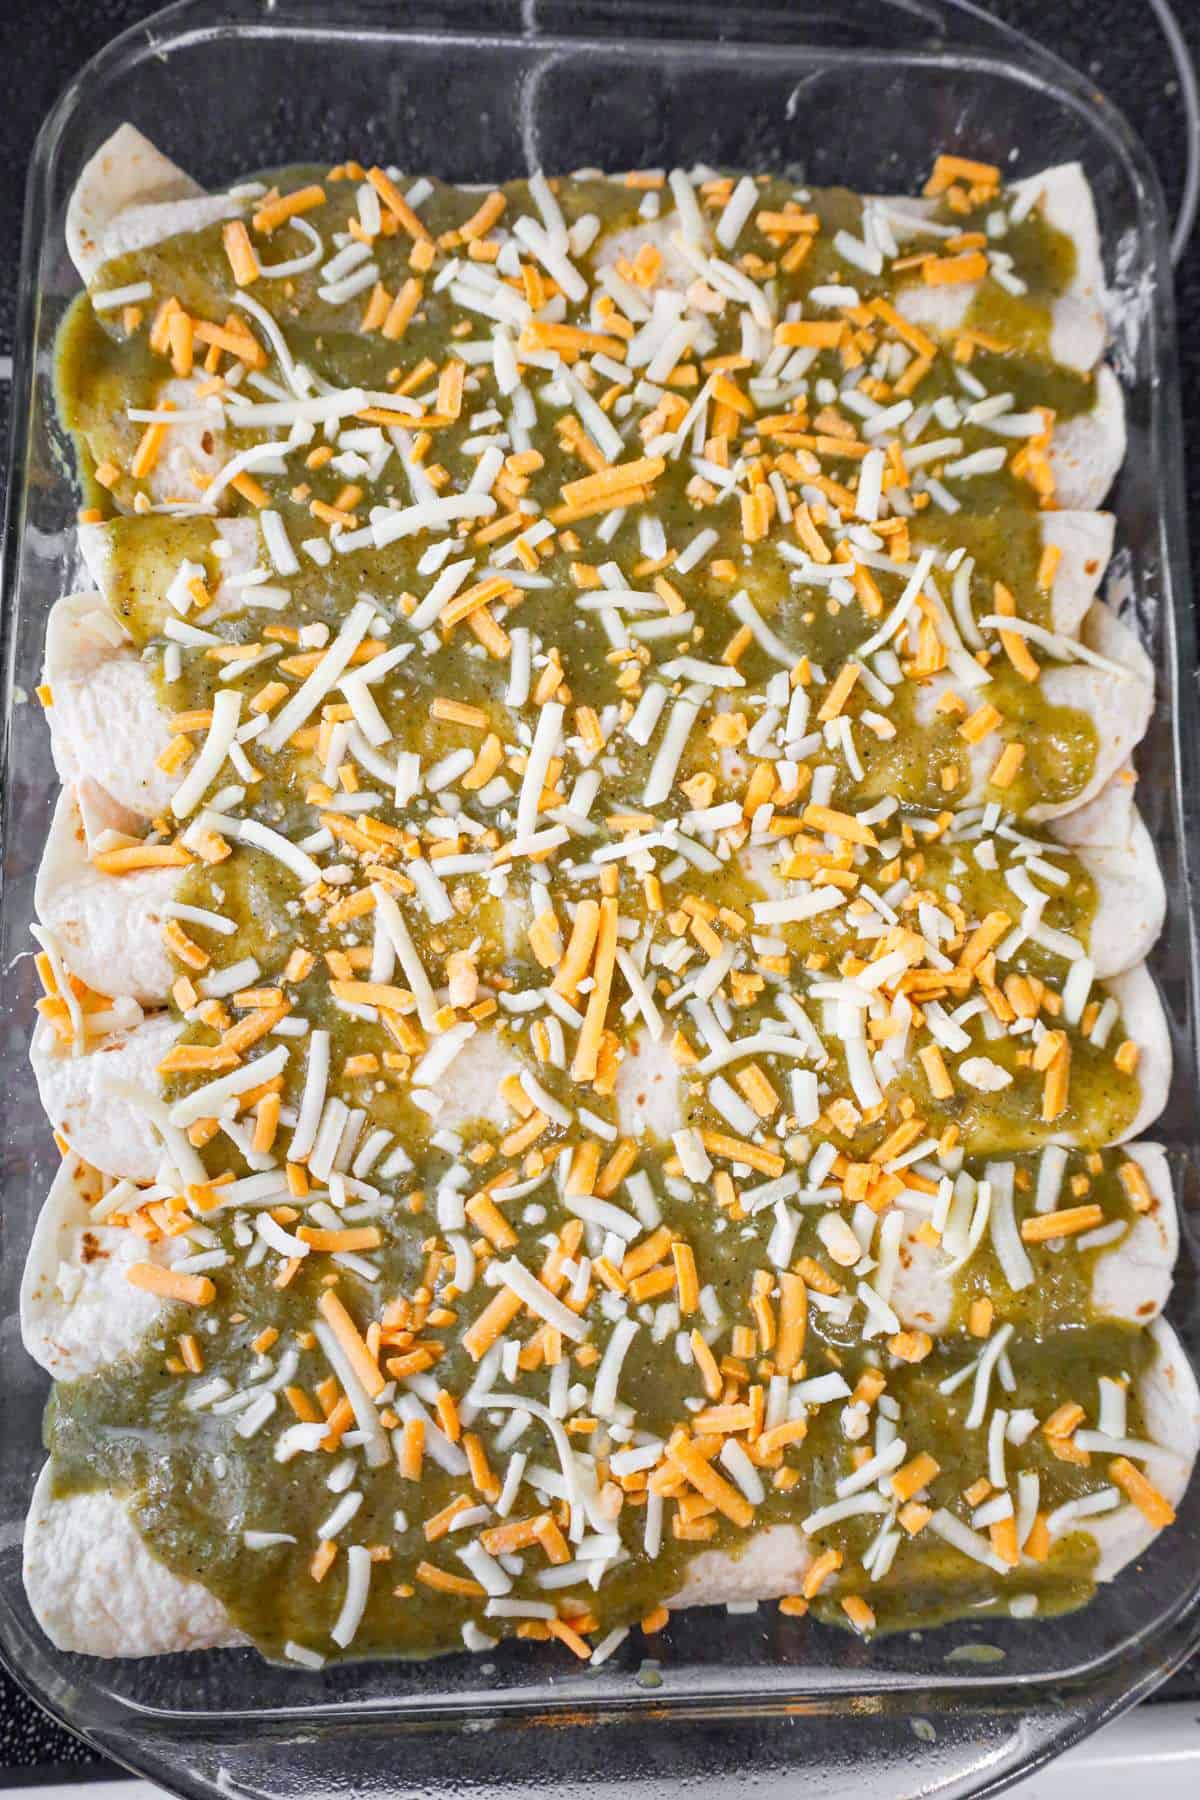 shredded cheese and green enchilada sauce on top of rolled tortillas in a baking dish